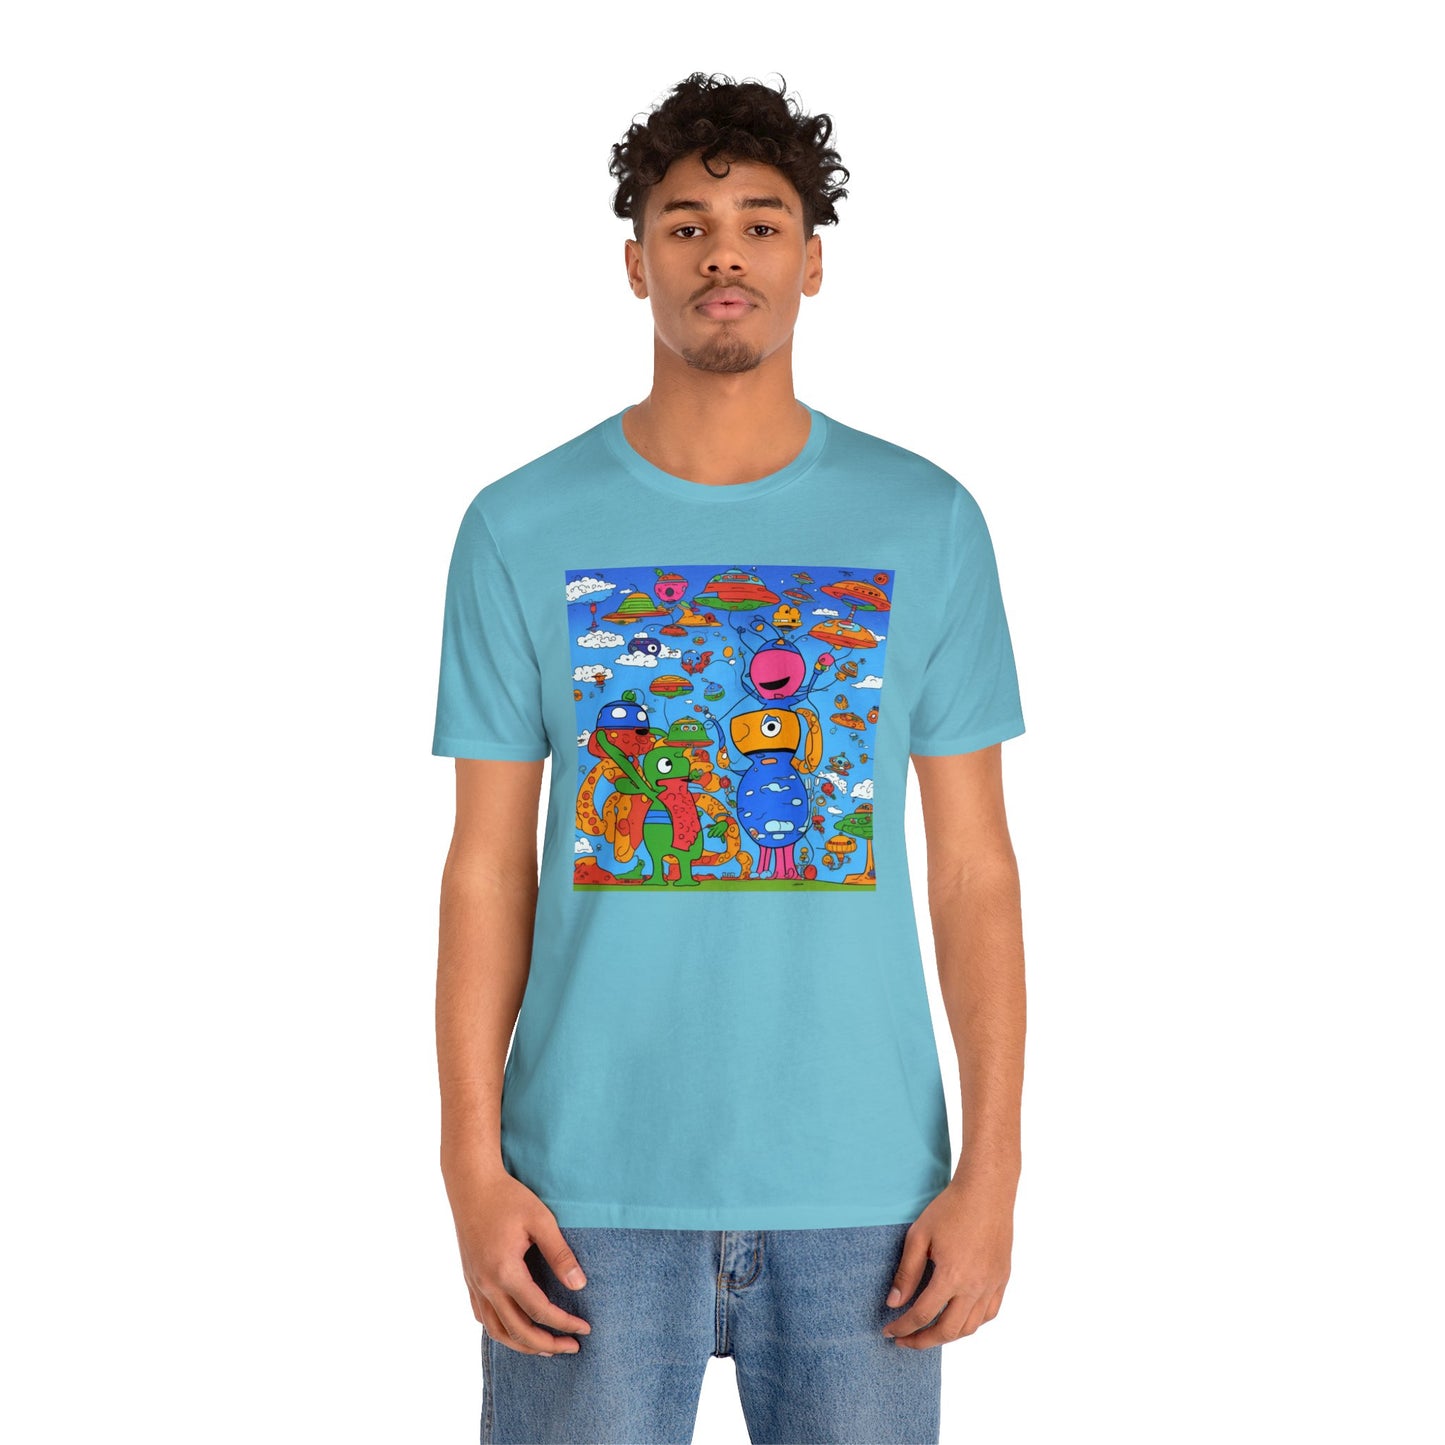 Abstraction | Abstract | Art | Colorful | Trendy | Graphic | Funny | UFO | Aliens | Tee | T-Shirt | Unisex | Men's | Women's |Short Sleeve